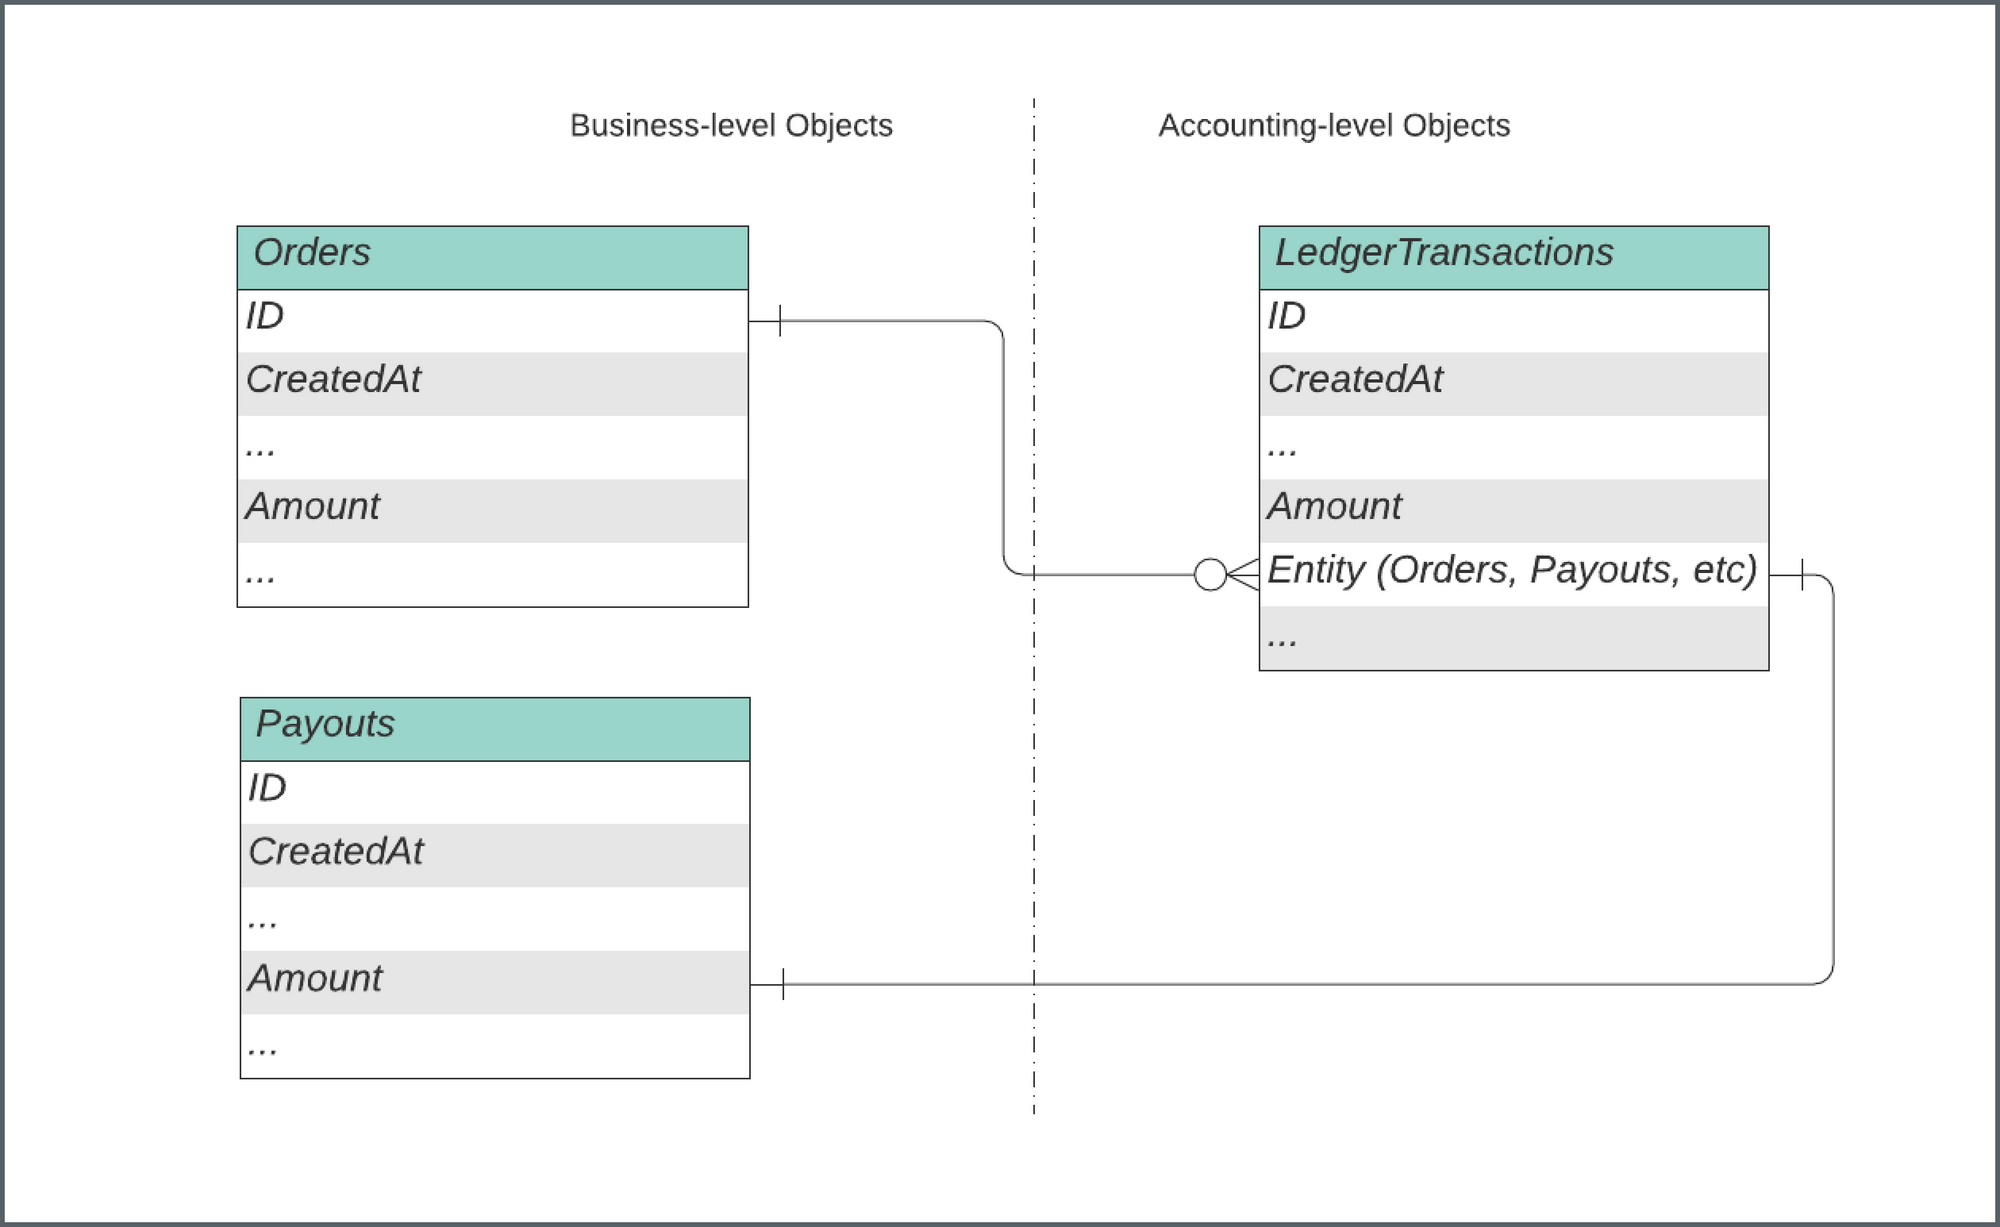 Diagram show business-level objects (orders, payouts) flowing into accounting-level objects (ledger transactions). 